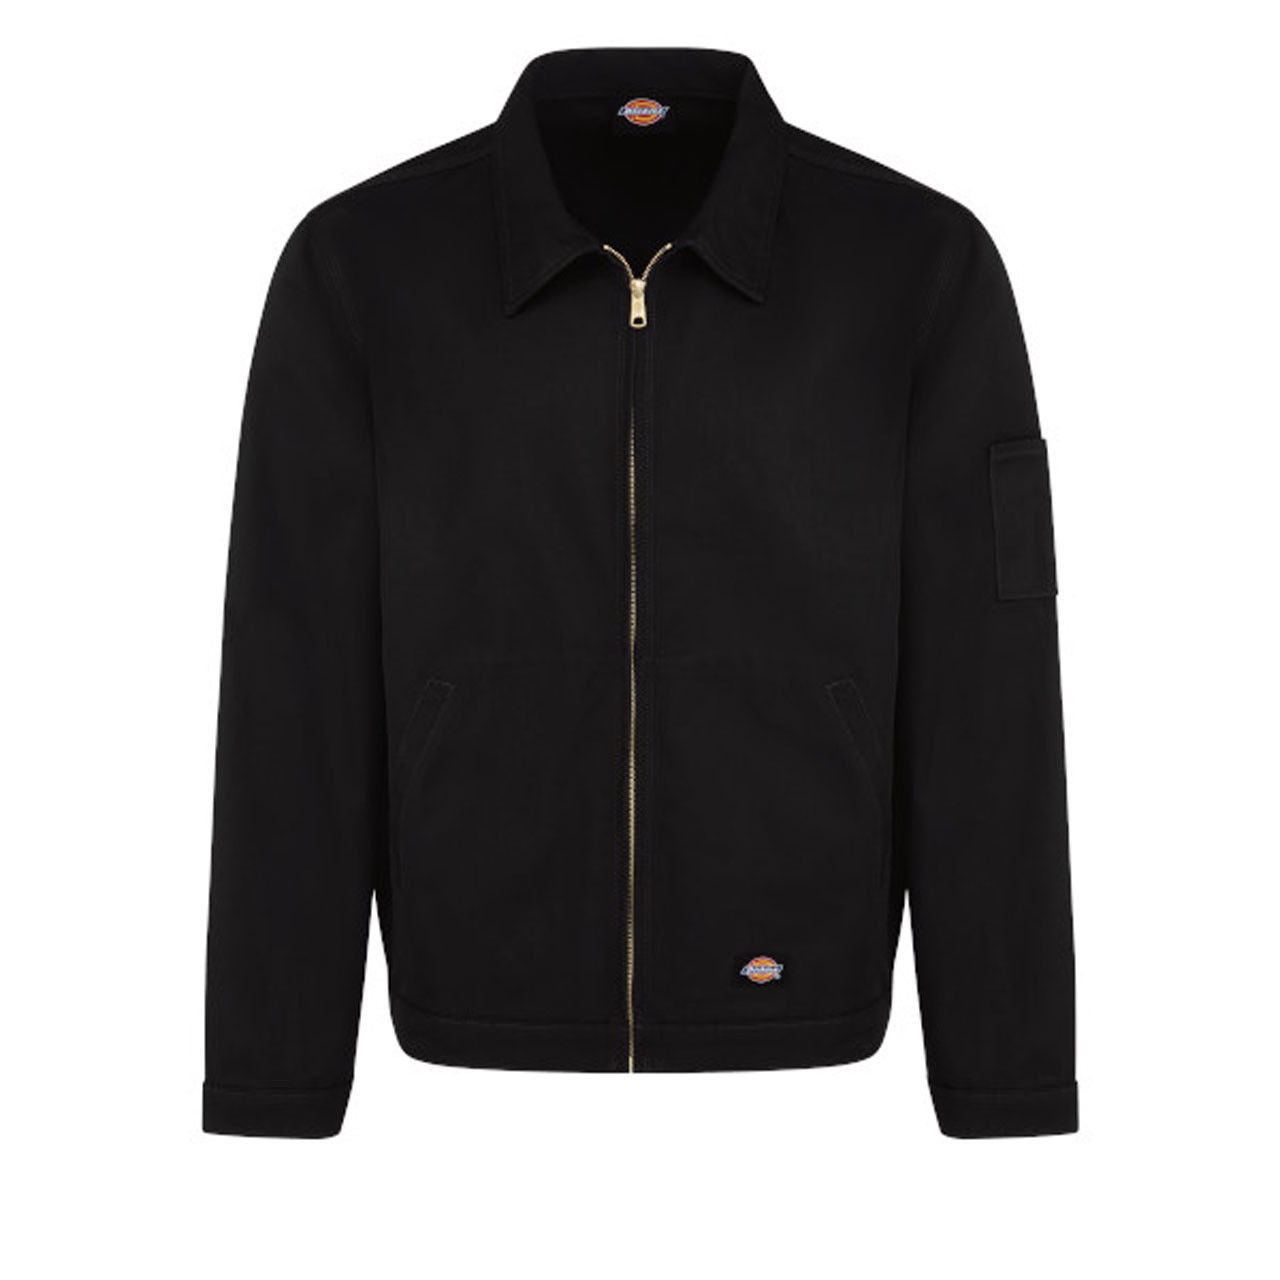 Where are the pockets located on the Dickies Unlined Industrial Eisenhower Jacket?